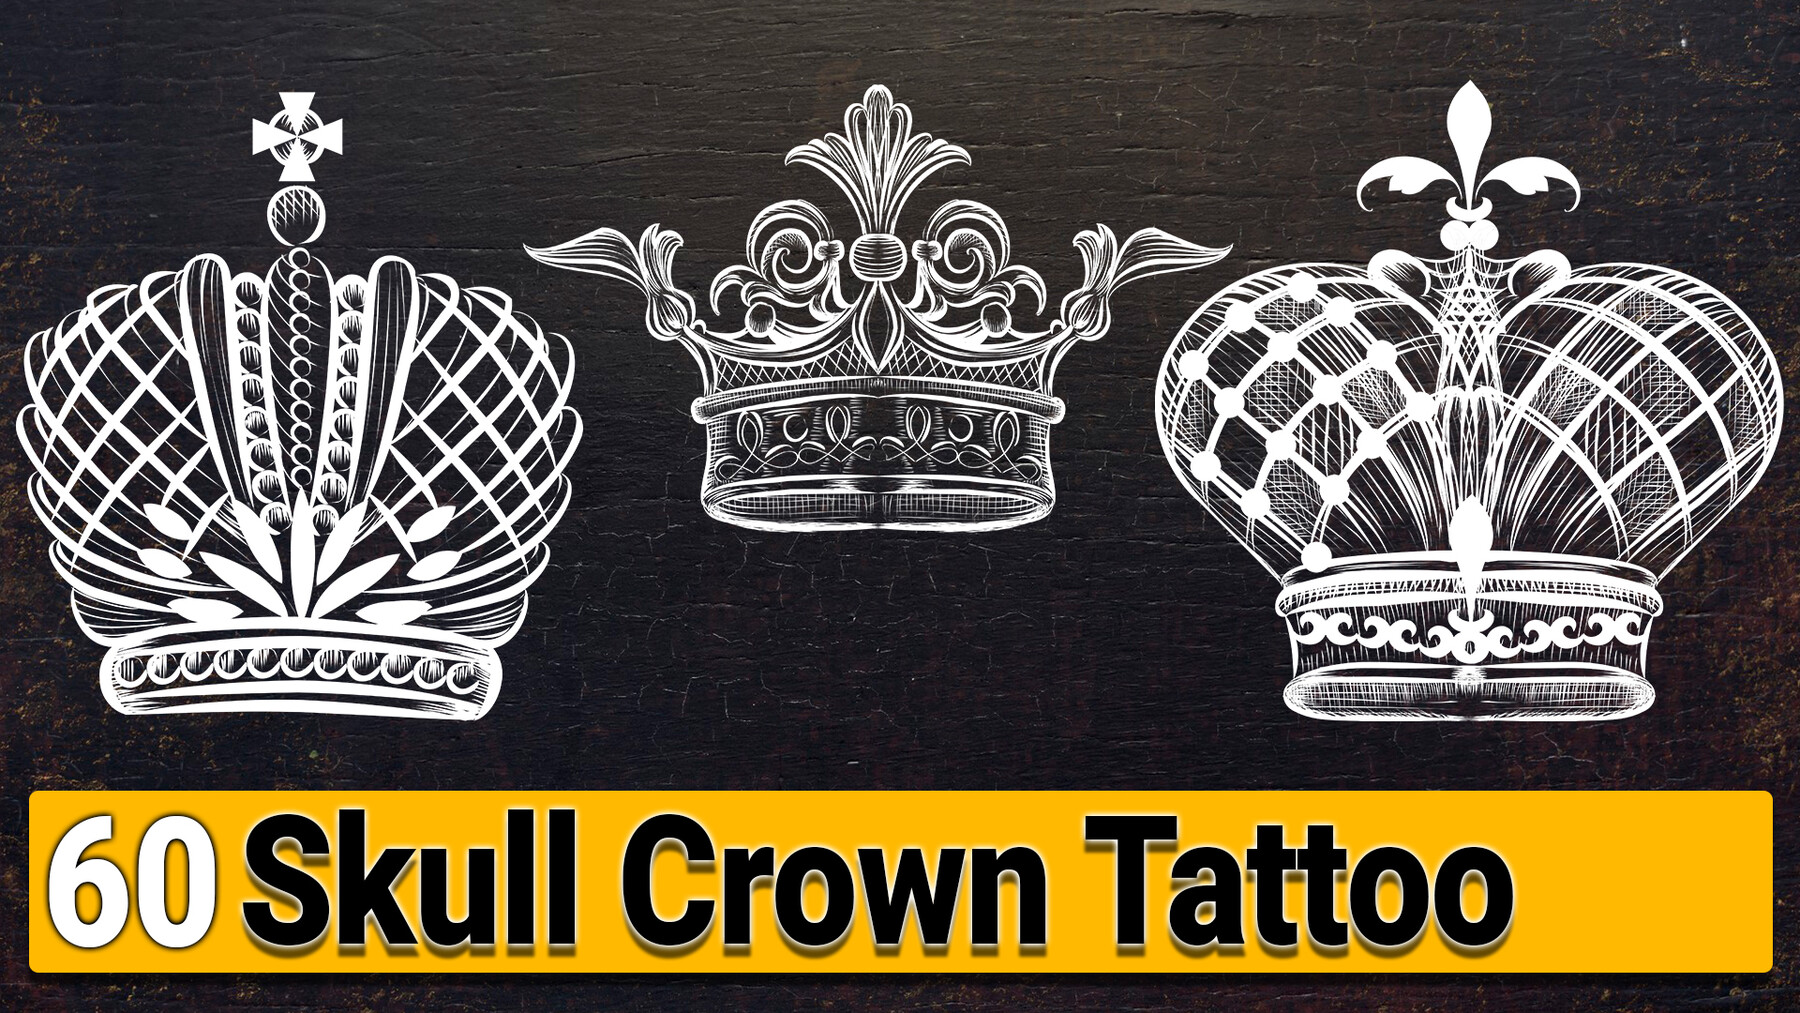 skull with crown tattoo designs